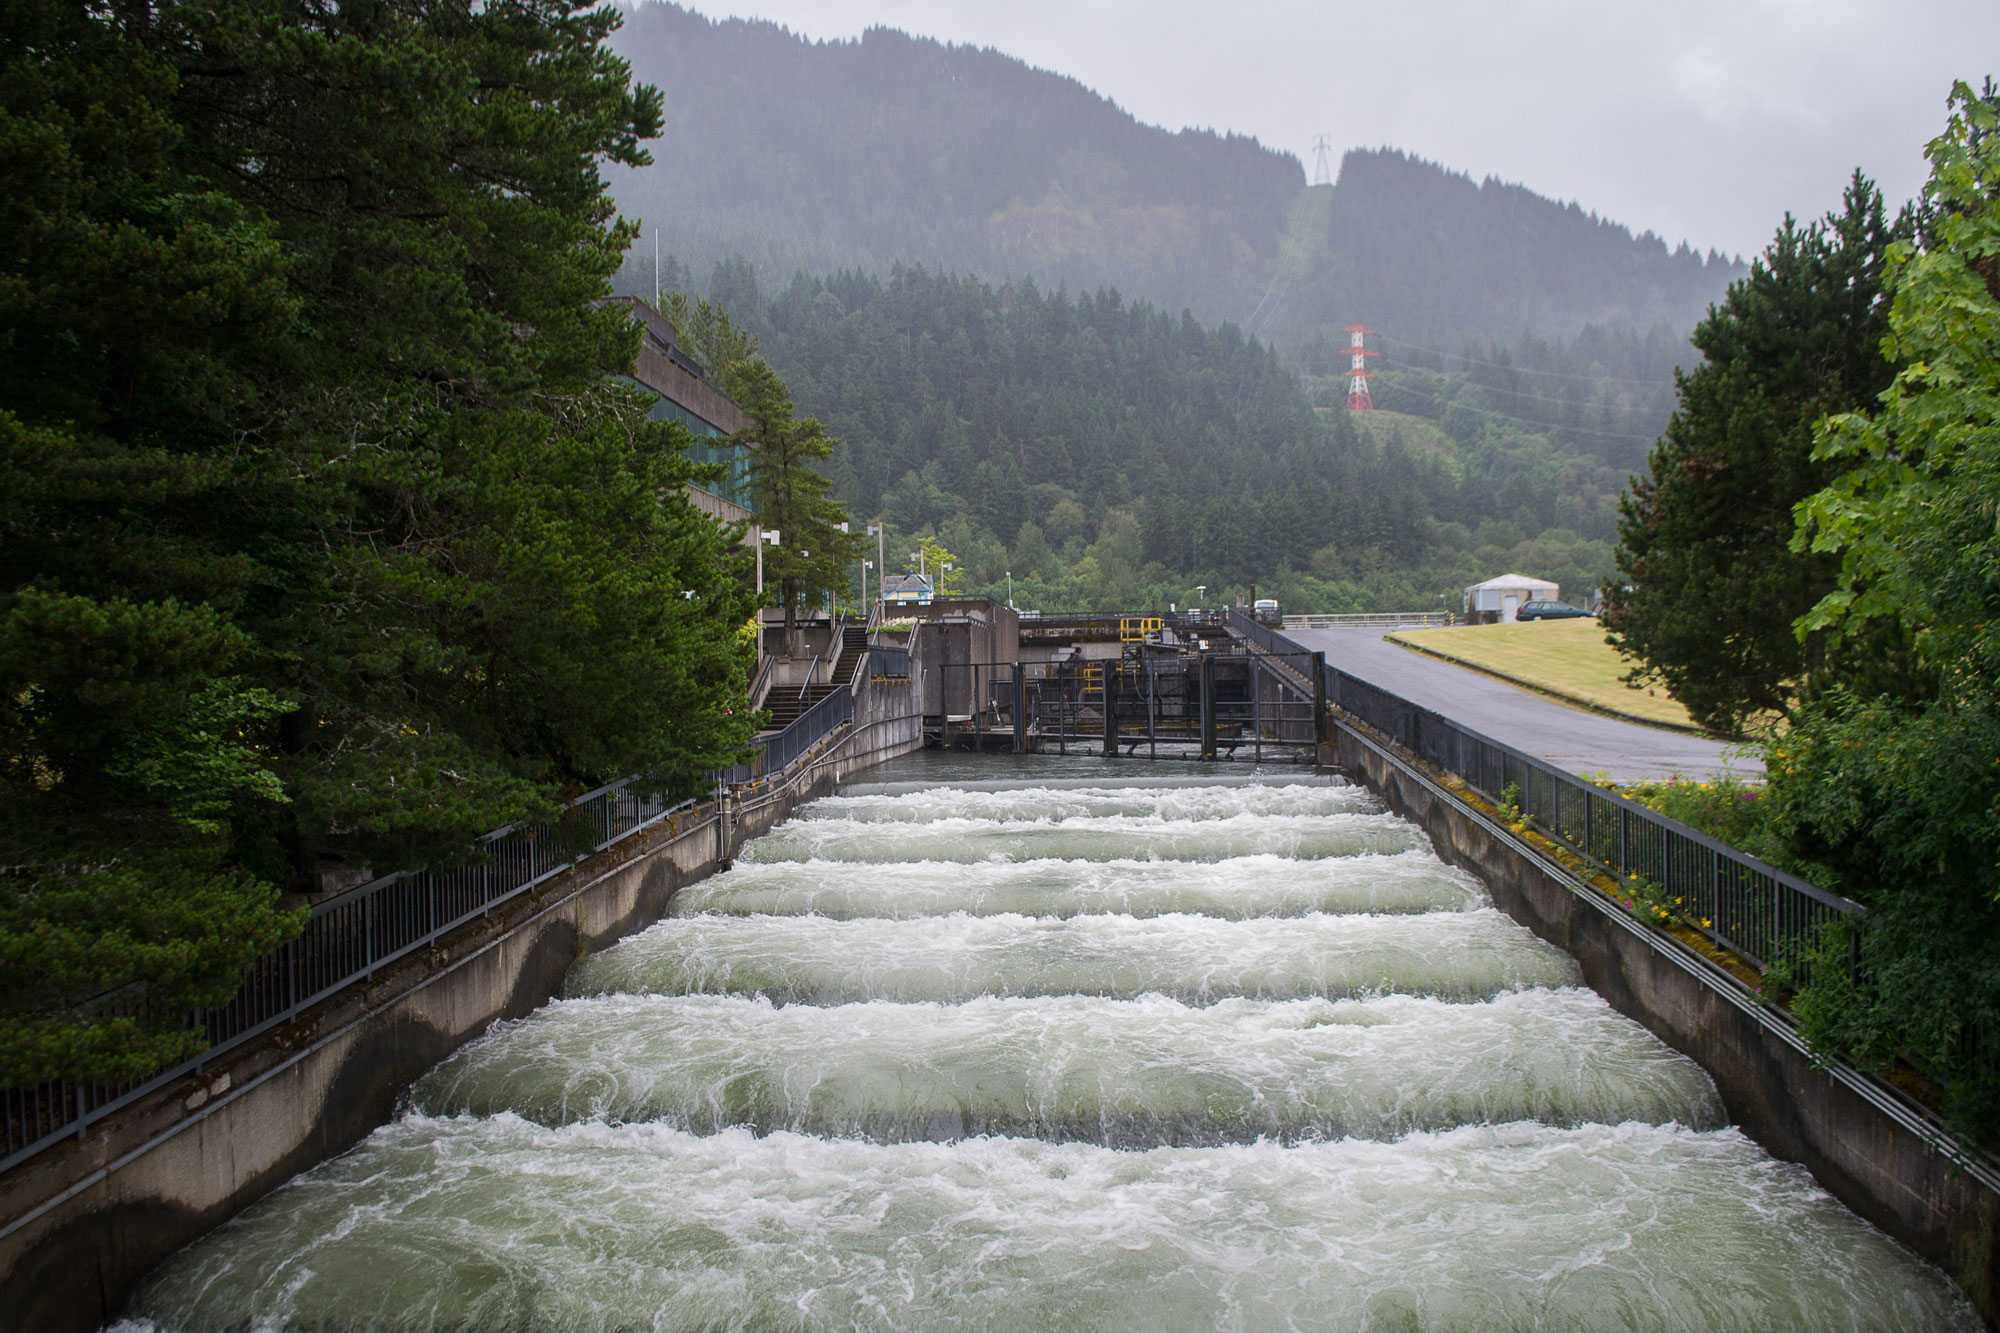 Photograph of a fish ladder on the Bonneville Dam, Columbia River, Oregon. The photo shows a water-filled channel with concrete sides. Steps covered by water allow fish to navigate over the dam.